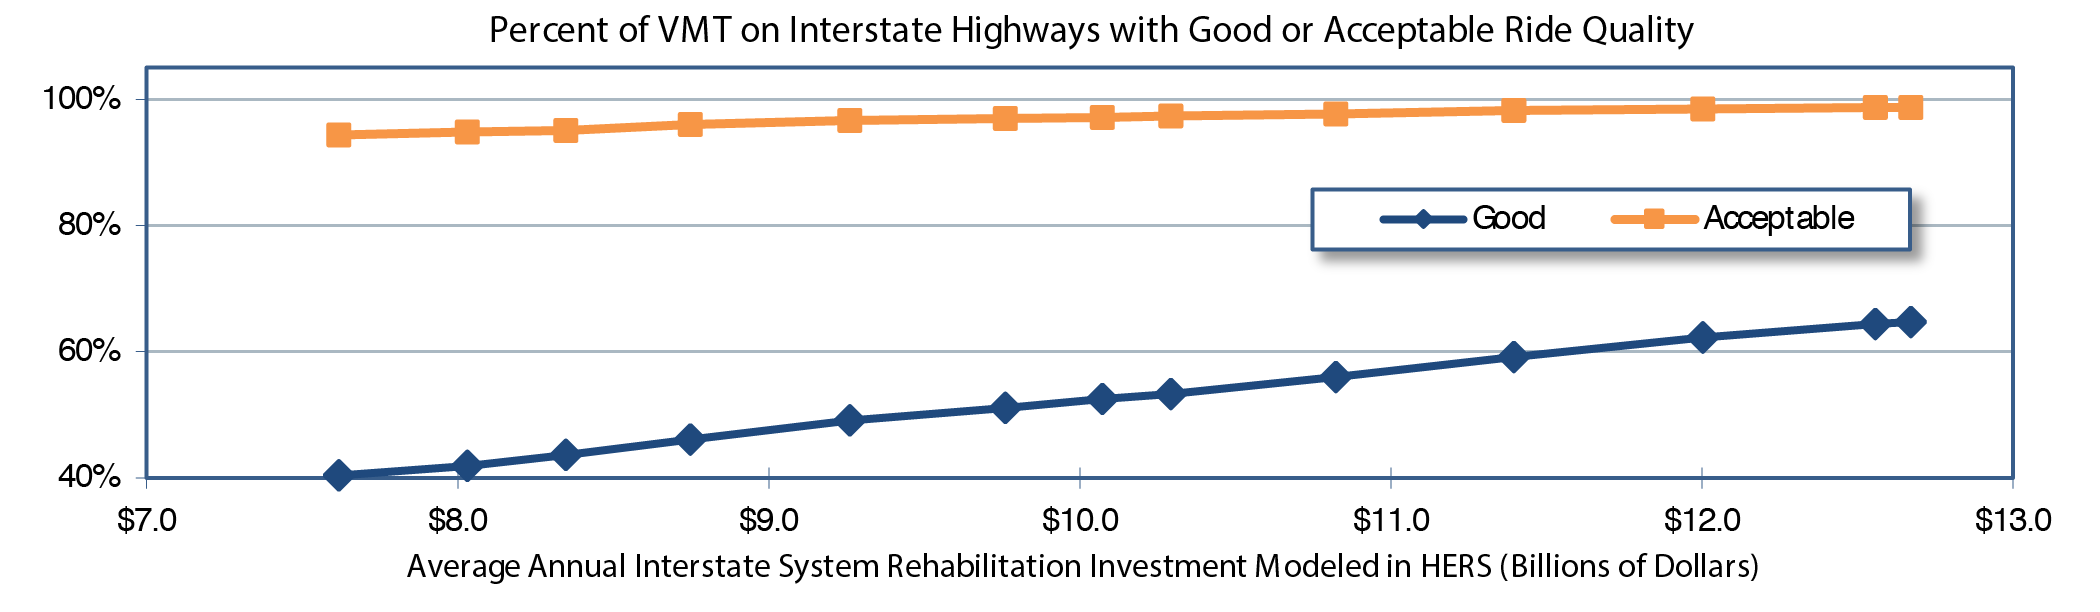 A line graph plots values for VMT on roads with good or acceptable ride quality in percent over average annual NHS rehabilitation investment in billions of dollars modeled in HERS. For the share of roads with good ride quality, the plot has an initial value of 40.4 percent of VMT at an annual investment of $7.6 billion, with the trend swinging upward to a value of 49.1 percent of VMT at an annual investment of $9.3 billion, continuing upward to 59.1 percent of VMT at an annual investment of $11.4 billion, ending at value of 64.7 percent of VMT at an annual investment of $12.7 billion. For the share of roads with acceptable ride quality, the plot has an initial value of 94.3 percent of VMT at an annual investment of $7.6 billion, with the trend swinging upward to a value of 96.6 percent of VMT at an annual investment of $9.3 billion, continuing upward to 98.2 percent of VMT at an annual investment of $11.4 billion, ending at value of 98.7 percent of VMT at an annual investment of $12.7 billion. Source: Highway Economic Requirements System.